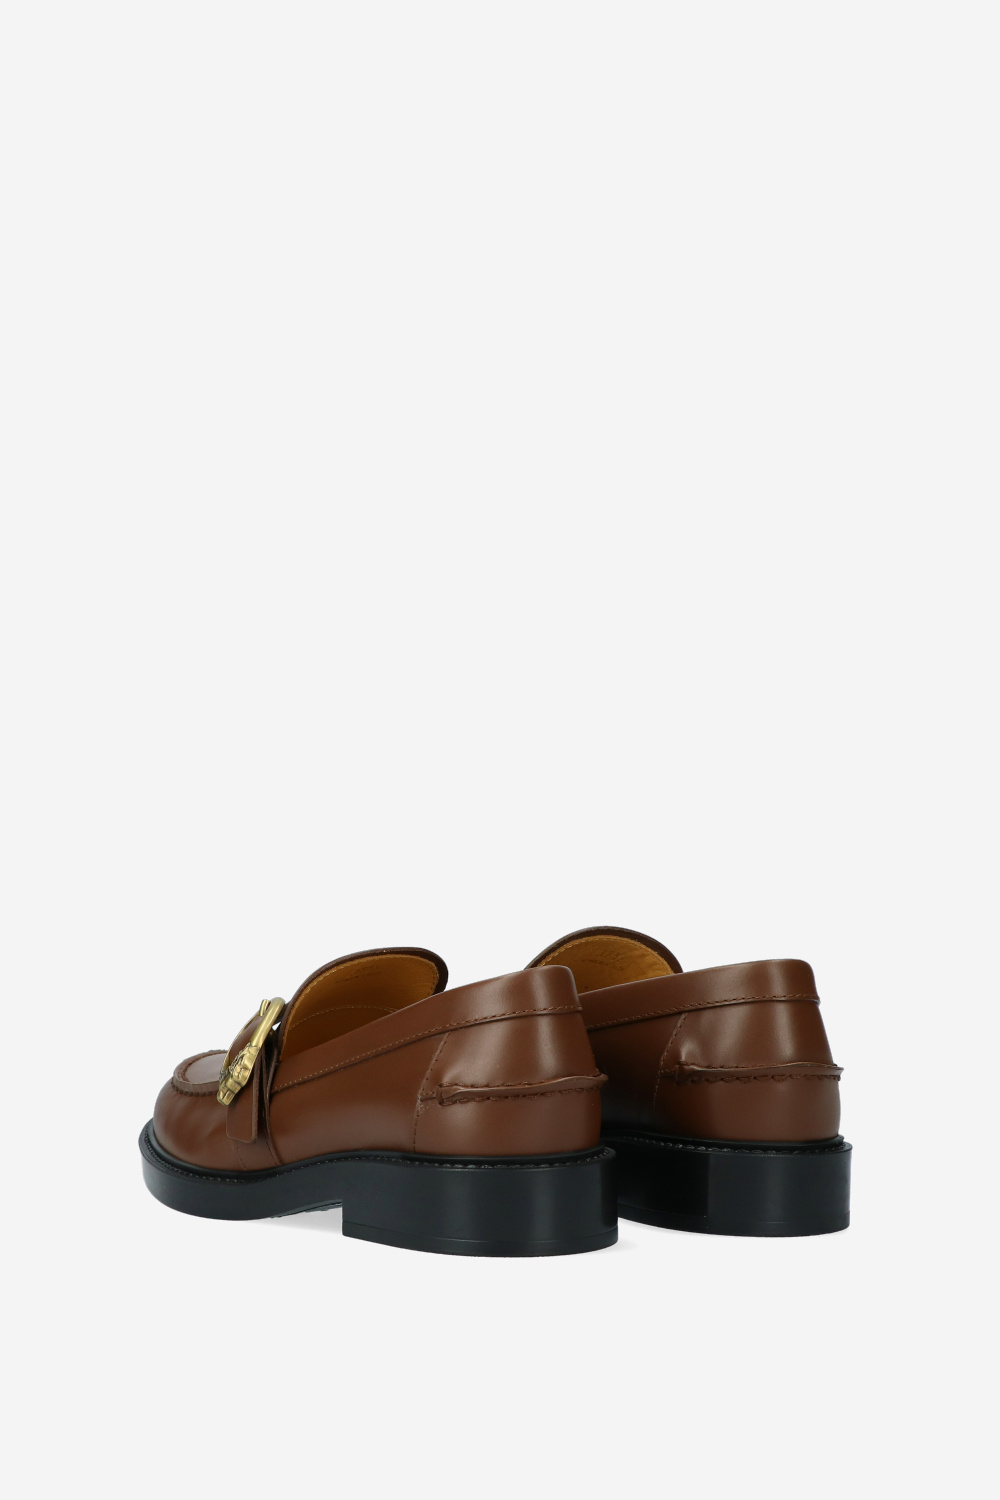 Tods Loafers Bruin